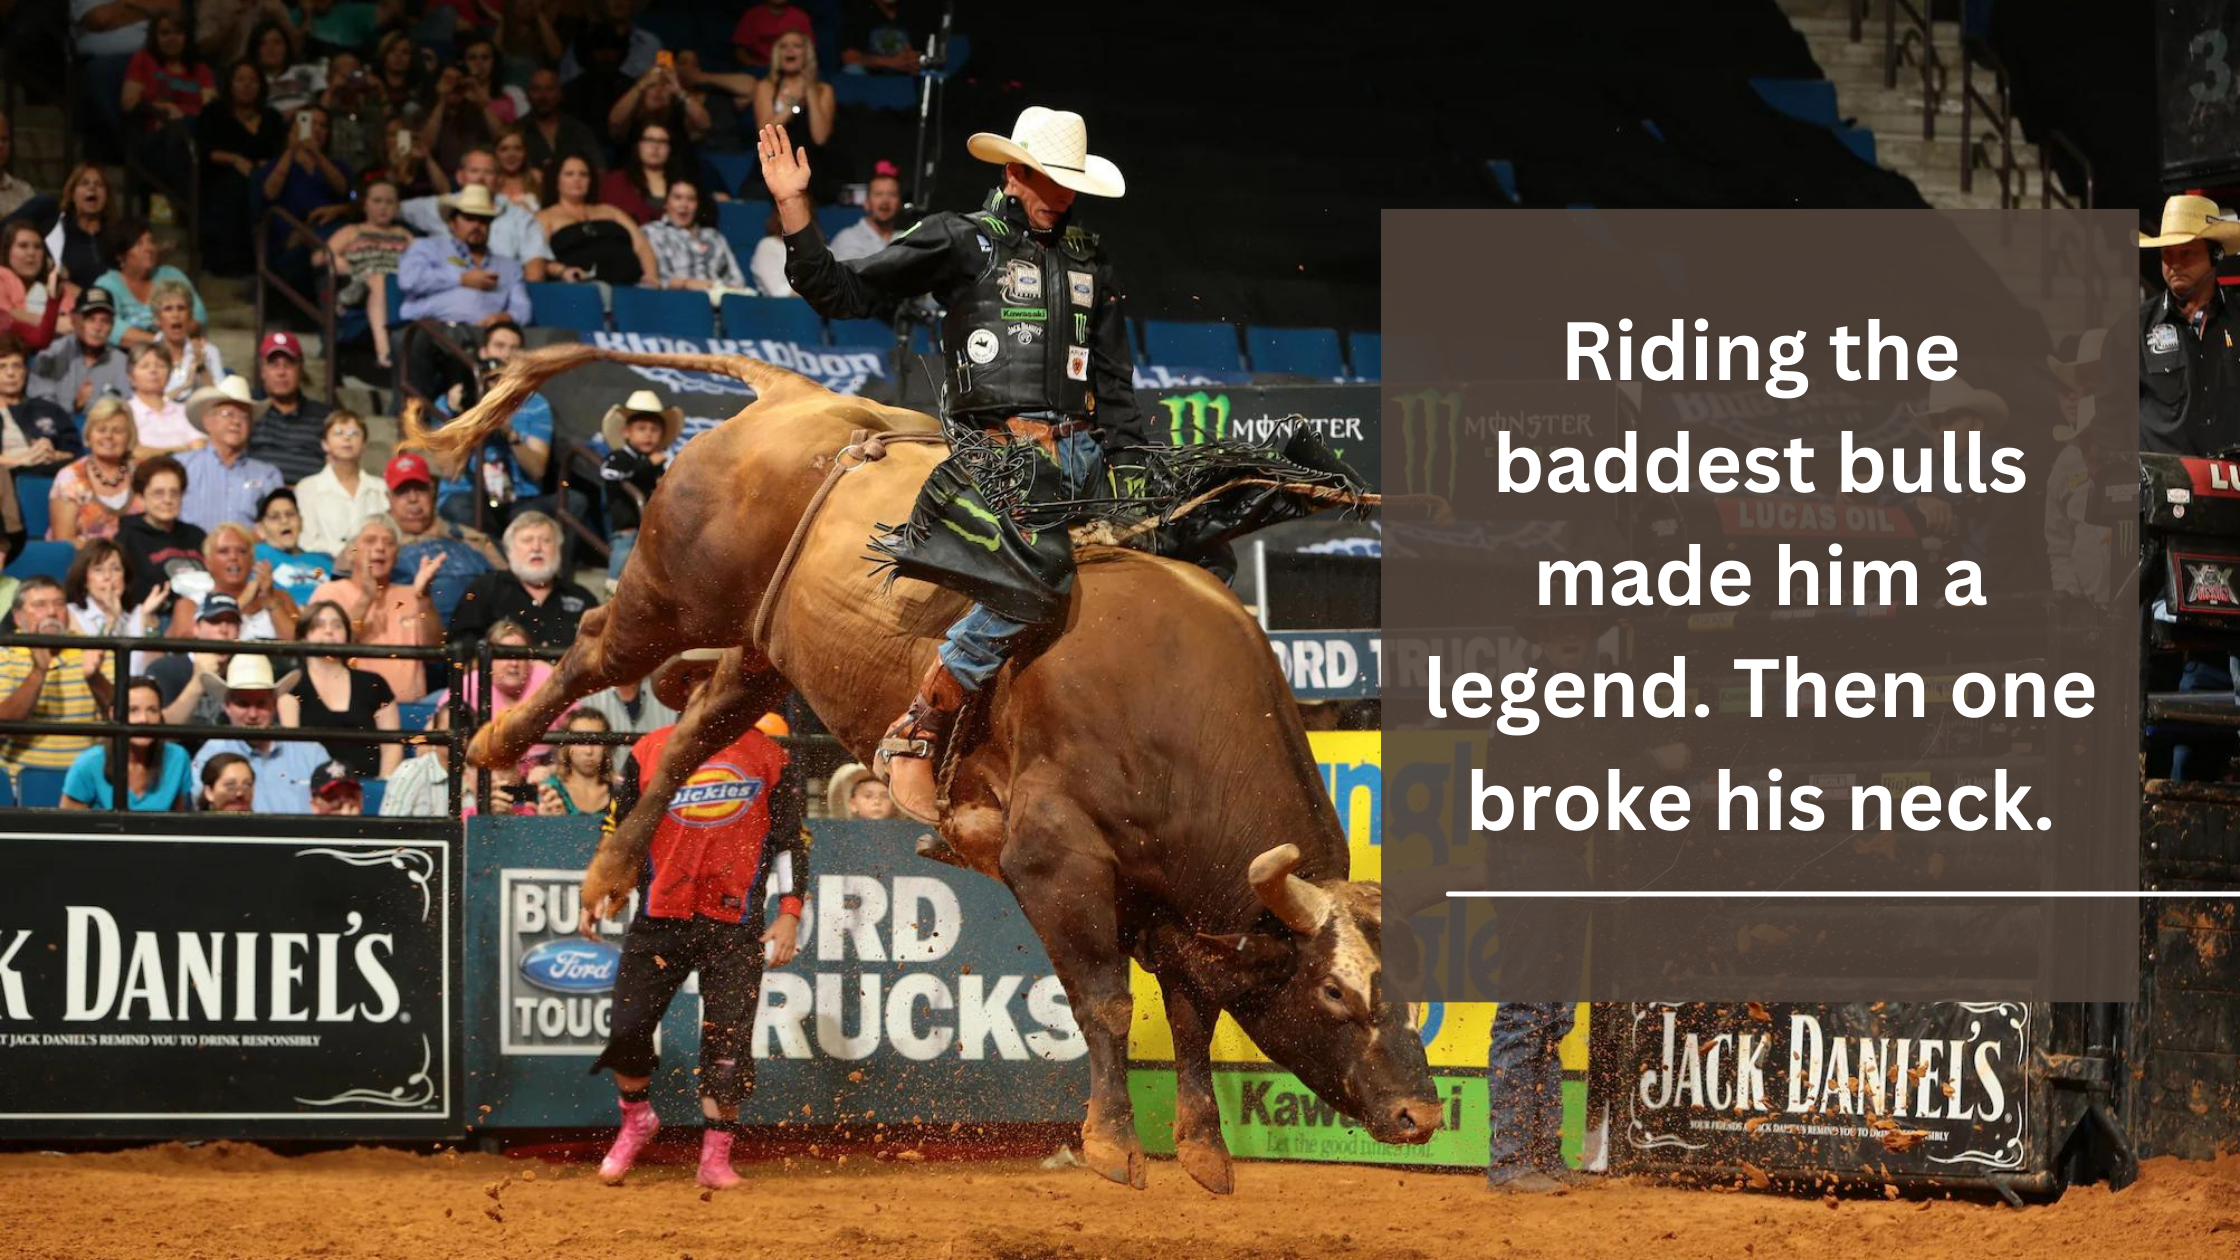 You are currently viewing He became a legend by riding the most dangerous bulls. Then a person tore his neck.